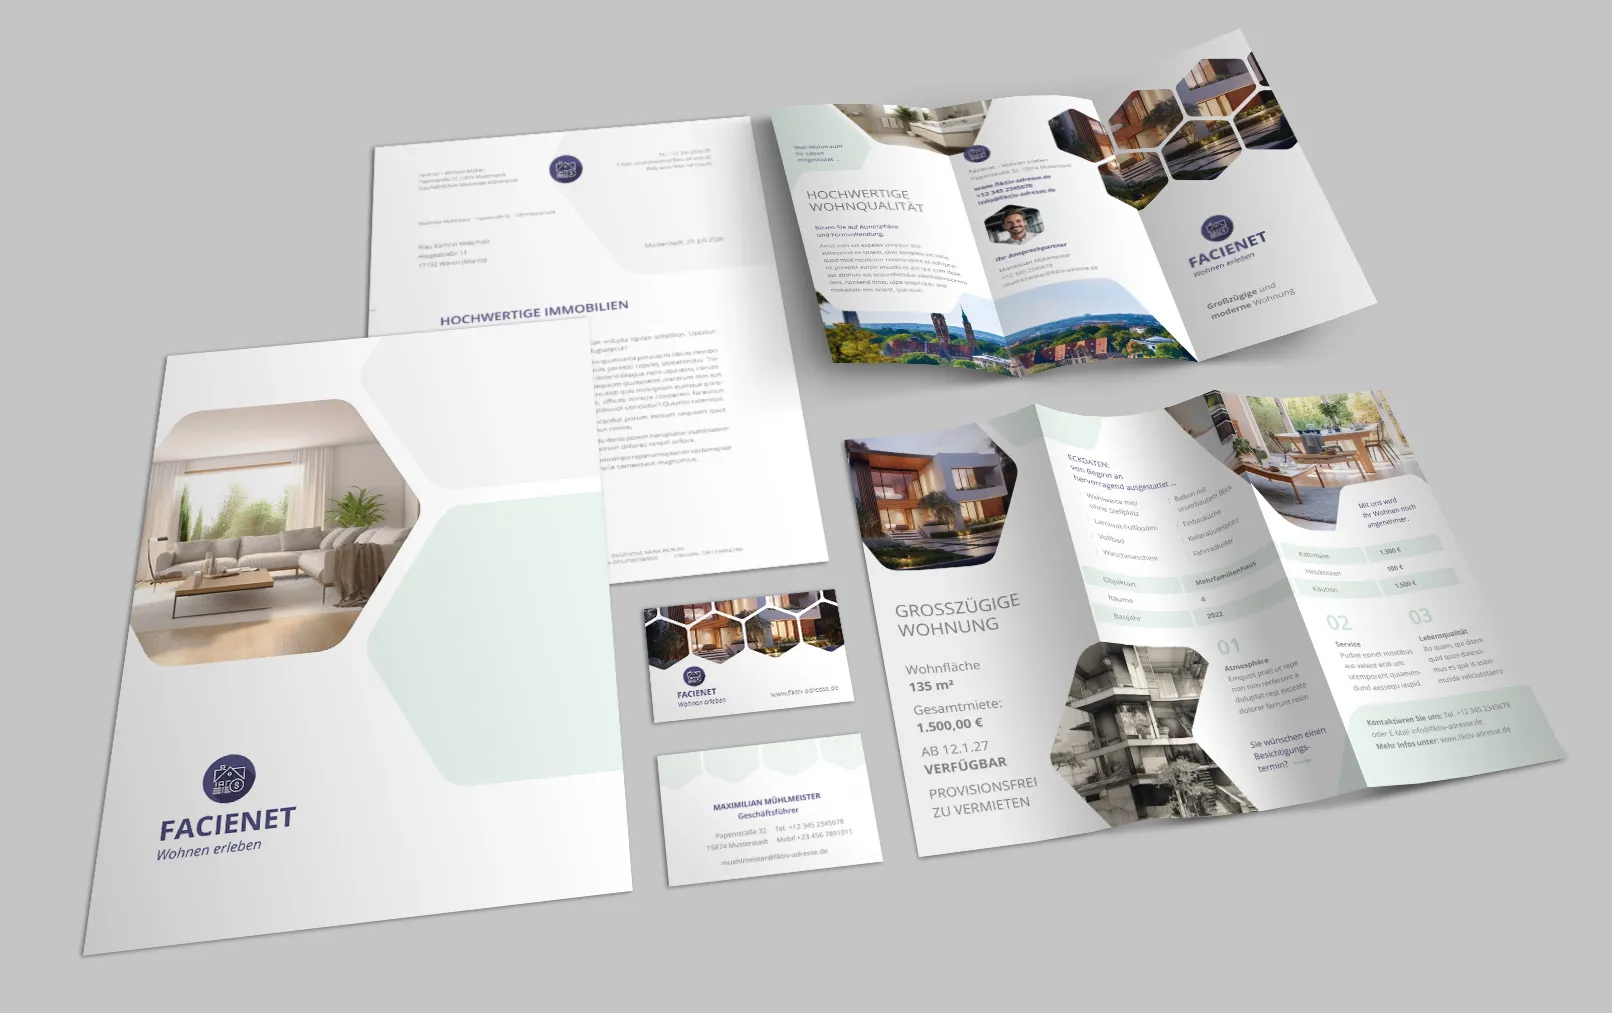 Corporate design templates for real estate companies and architecture firms: Letterhead, flyer, business card